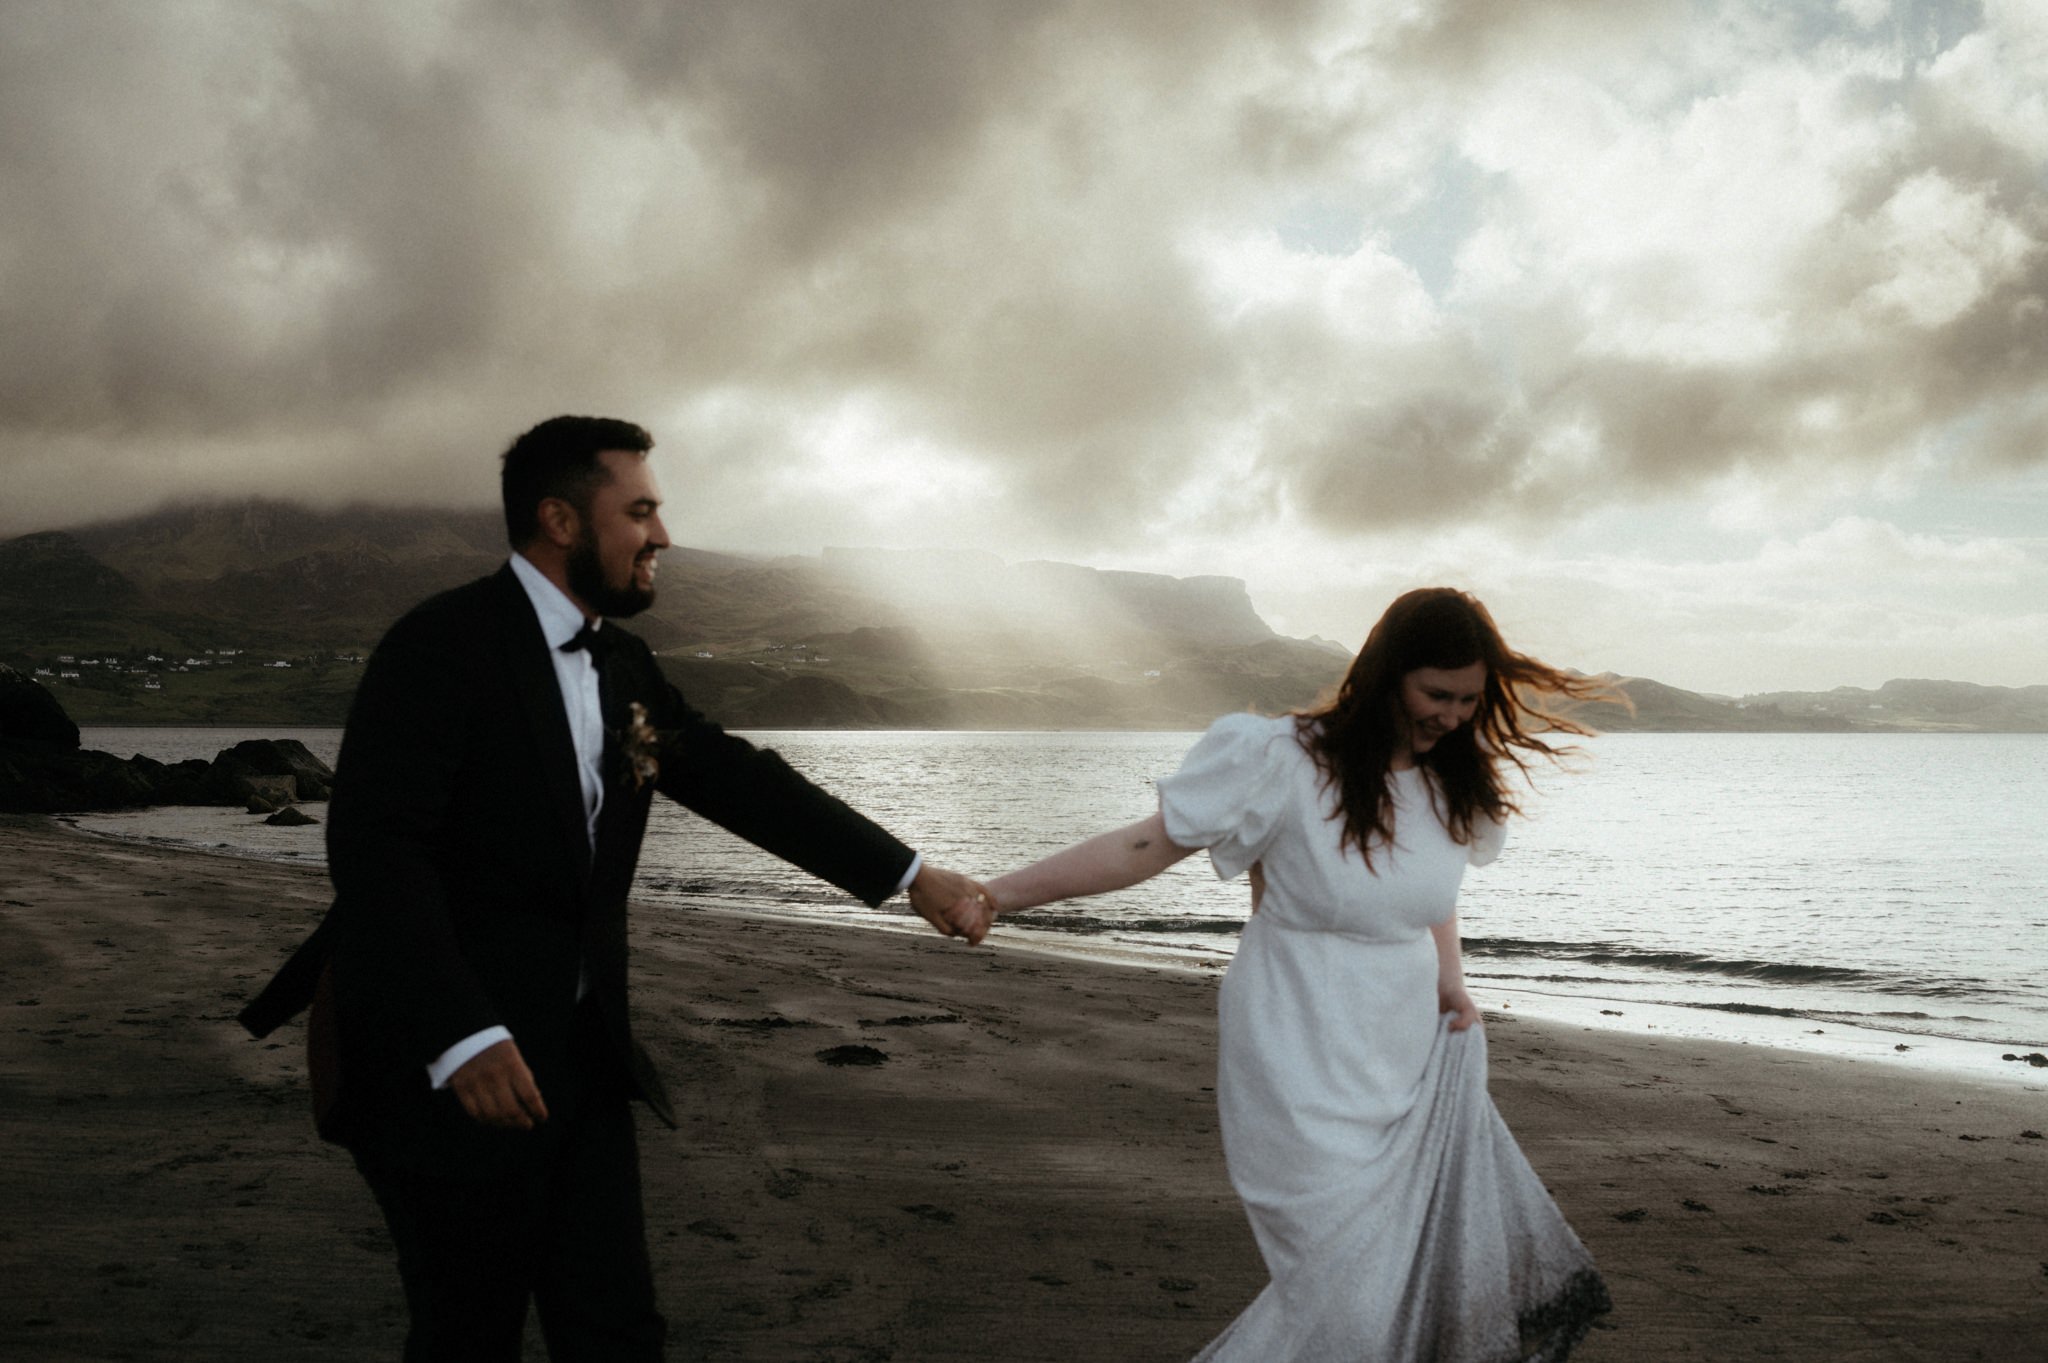 Scotland elopement photographer Sean Bell's image of Bride and Groom walking on Staffin beach with a sunset behind